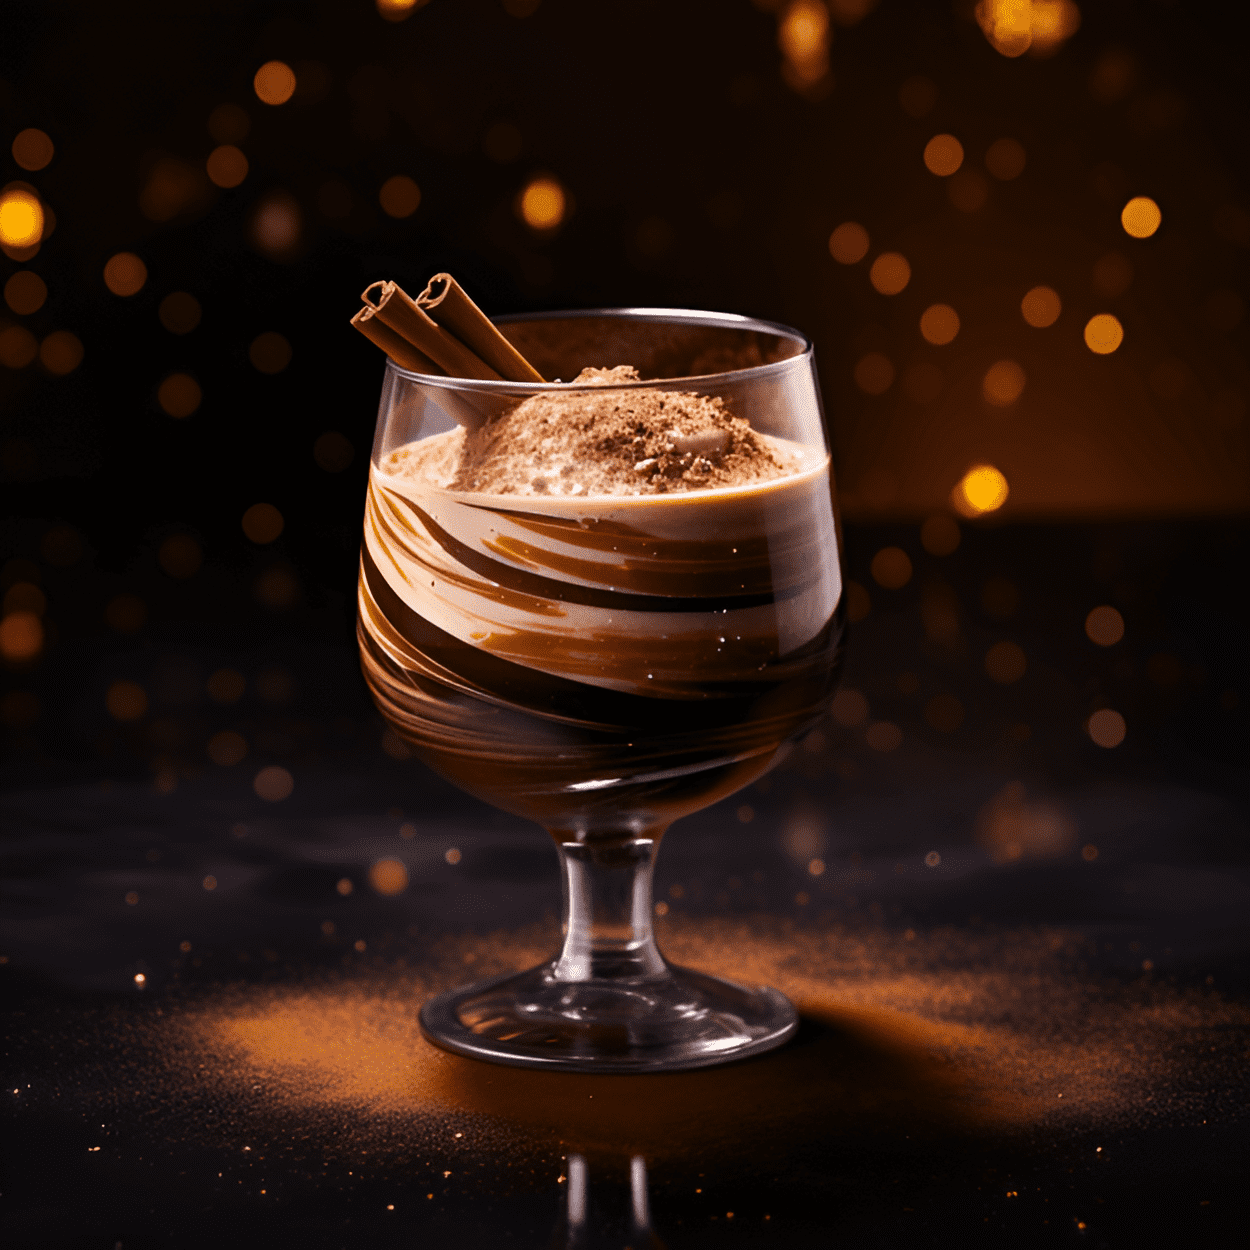 Milky Way Cocktail Recipe - The Milky Way Cocktail is sweet and creamy, with a rich chocolate flavor. It has a smooth, velvety texture and a hint of vanilla. The taste is reminiscent of a Milky Way candy bar, making it a delightful treat for the senses.